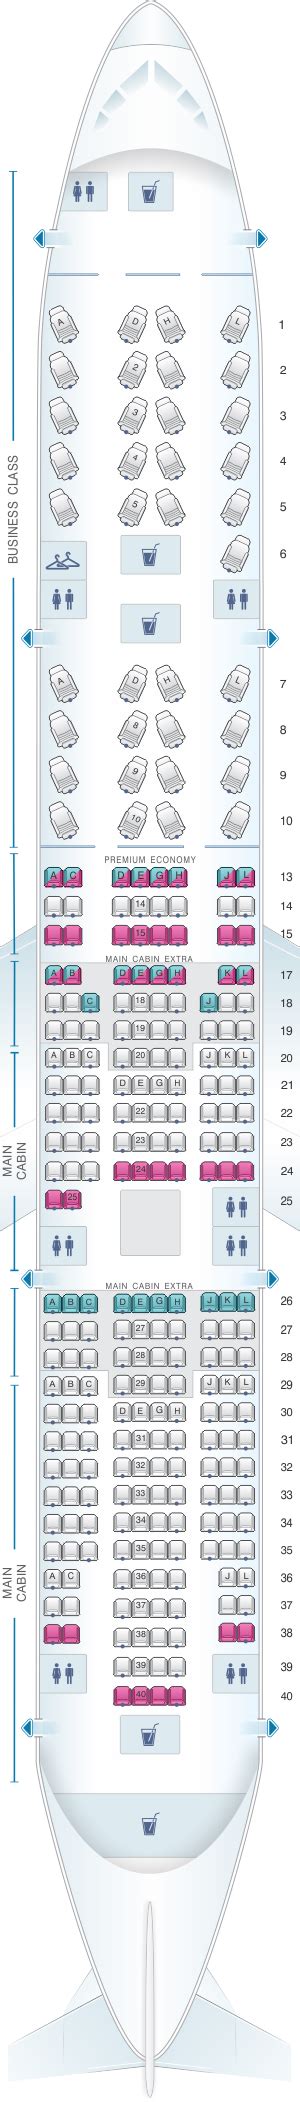 Boeing Er American Airlines Seat Map